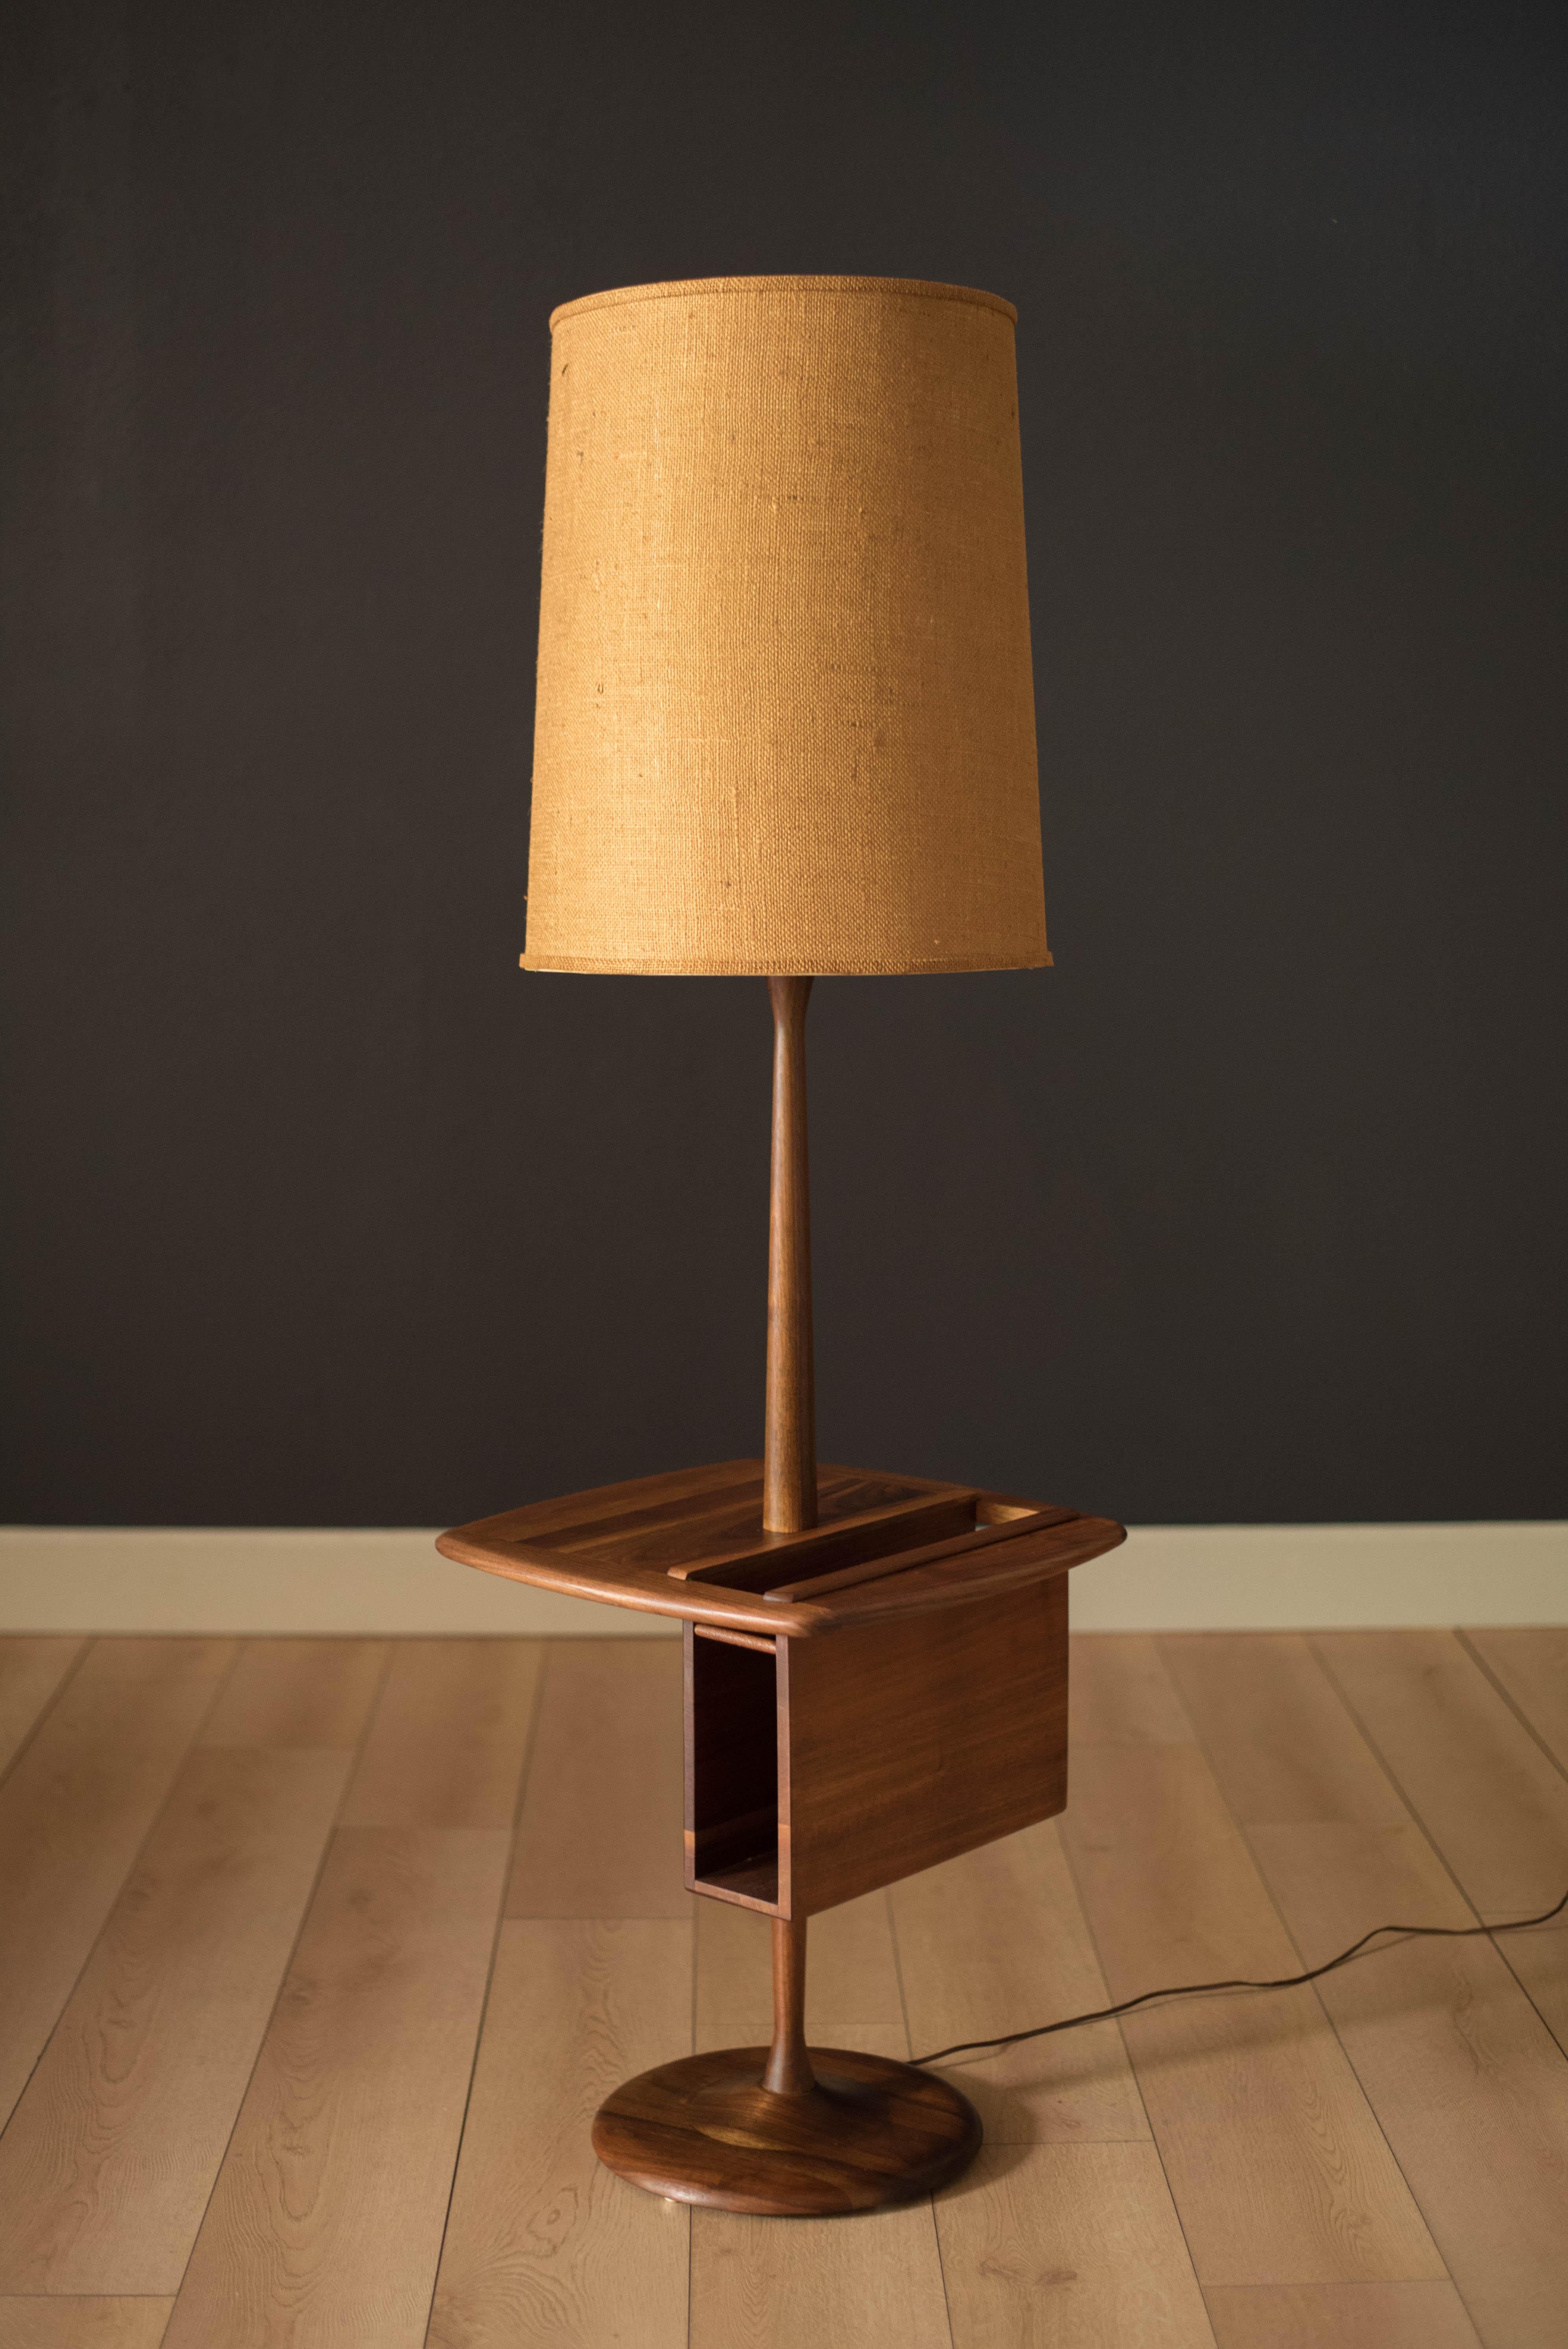 Vintage floor lamp with attached side table in walnut by Laurel Lamp Co. This versatile piece includes a magazine or book holder and burlap drum shade. 

 